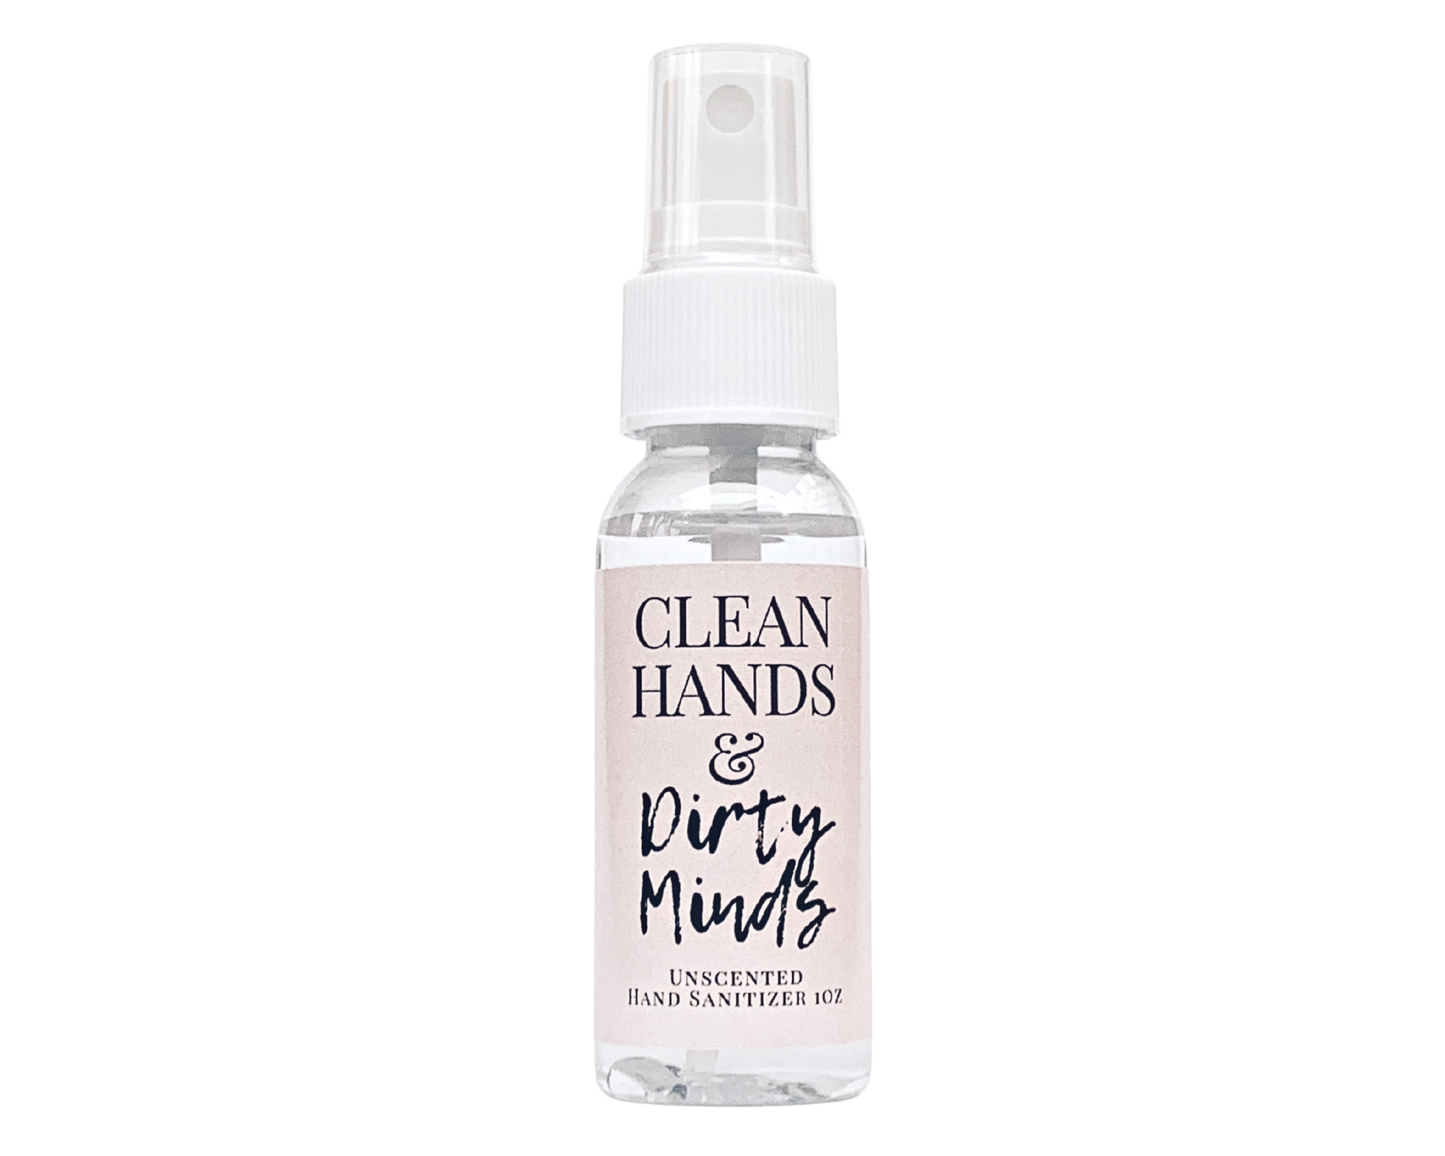 Bachelorette Party Hand Sanitizer Party Favor - Clean Hands & Dirty Minds - with Aloe & Essential Oils by Sunshine & Sanitizer